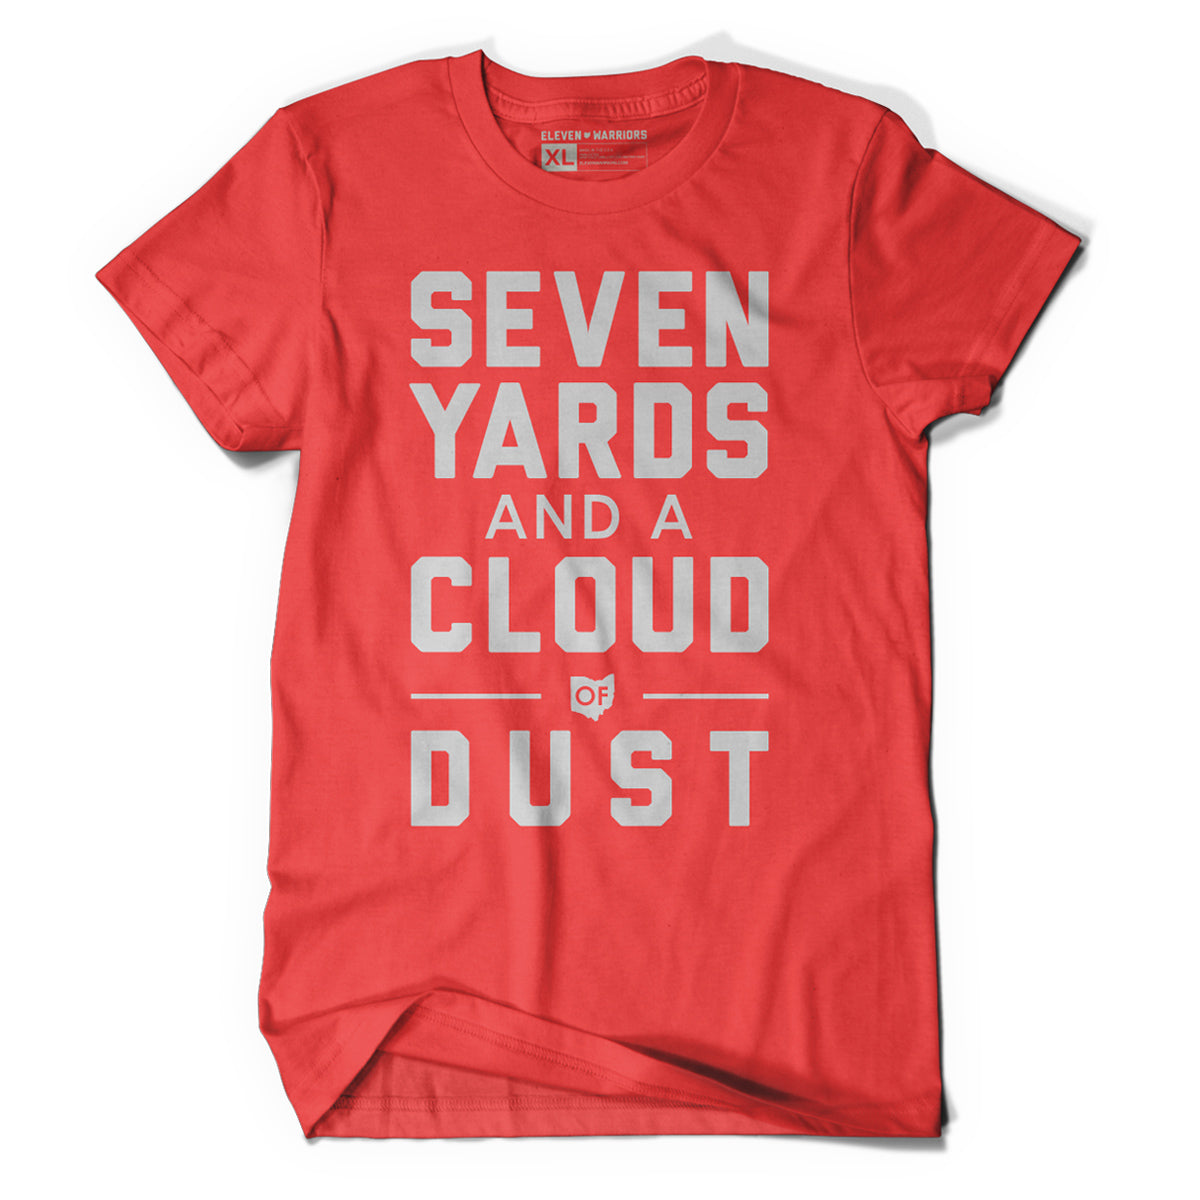 Seven Yards and a Cloud of Dust Tee